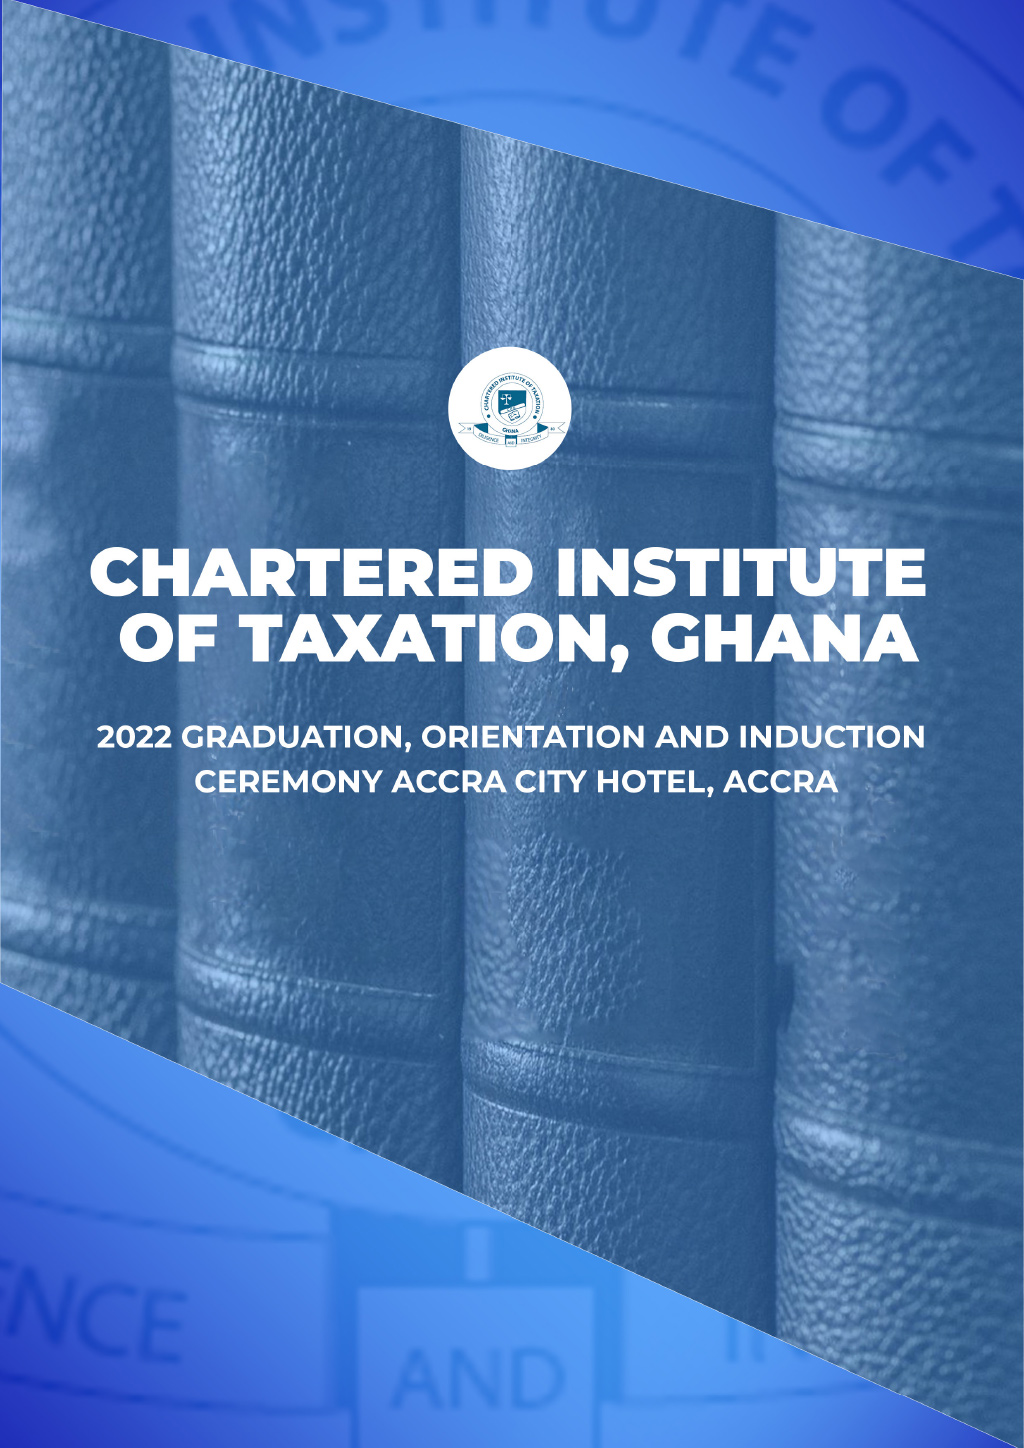 Brochure CHARTERED INSTITUTE OF TAXATION GHANA 1 1